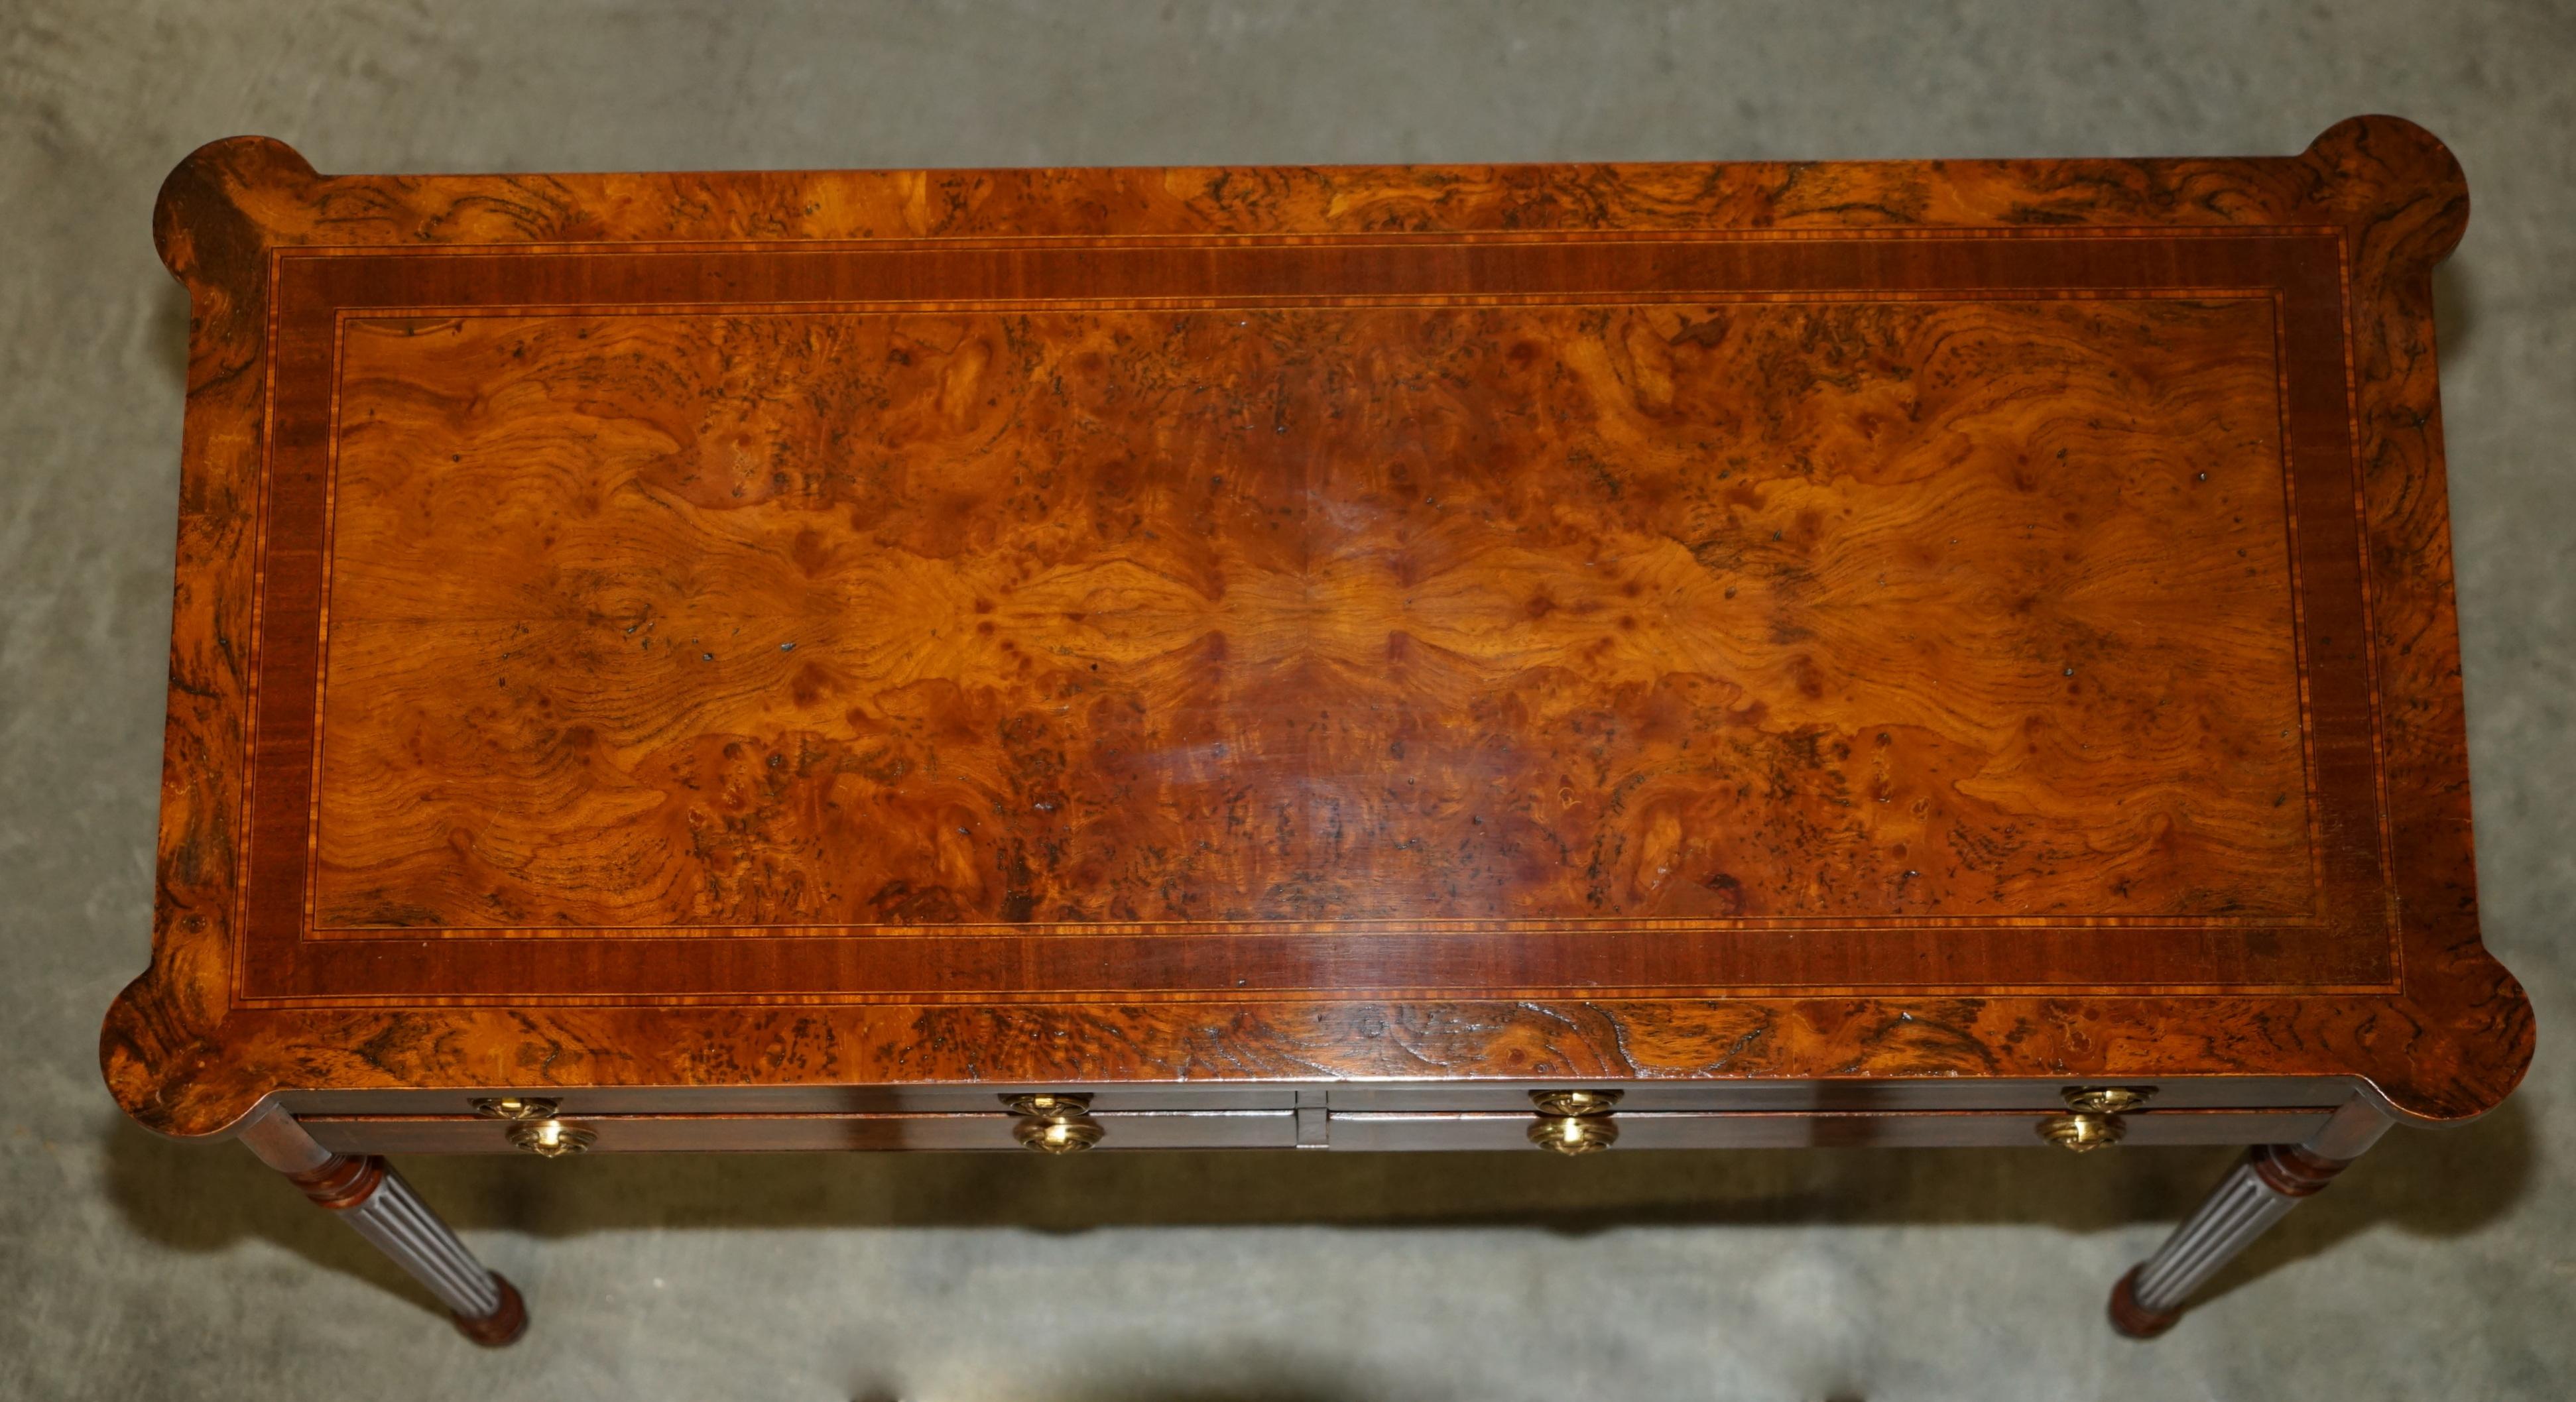 EXQUISITE CIRCA 1920 BURR ELM & SATiNWOOD FRENCH POLISHED RESTORED CONSOLE TABLE im Angebot 2